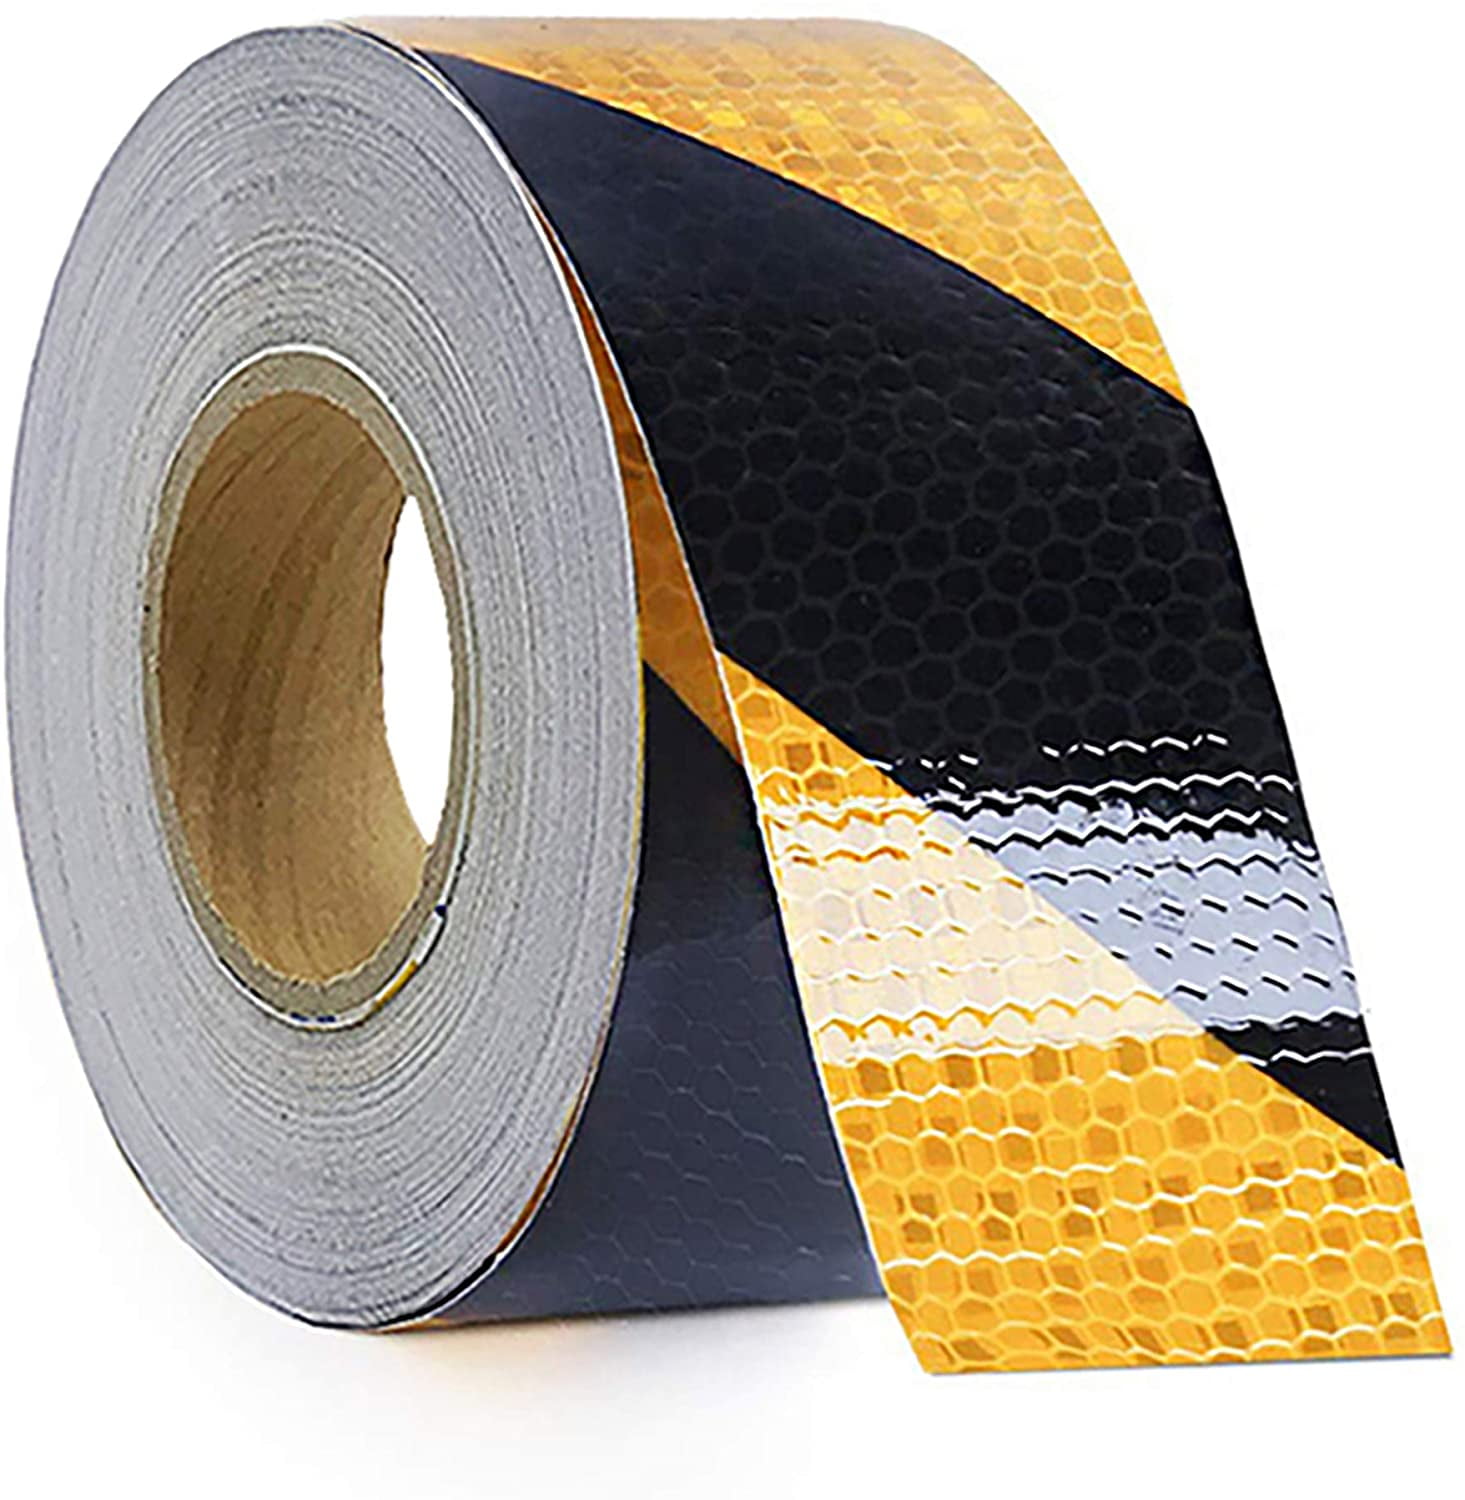 Reflective Warning Conspicuity Car Trailer Safe Tape Sticker Approved Roll Film 